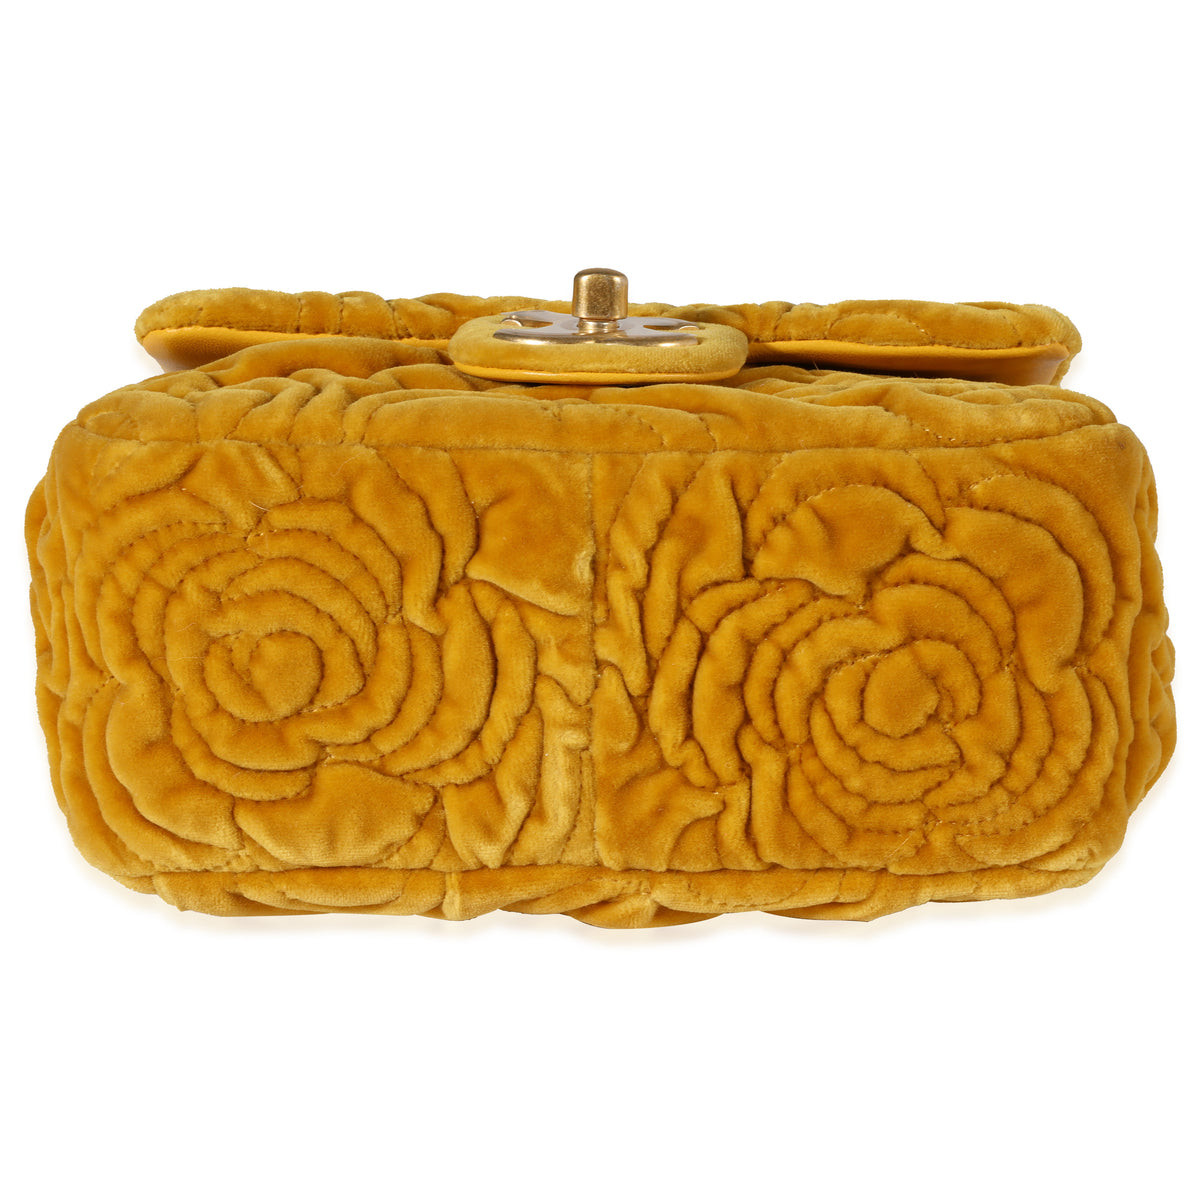 Chanel Gold Camellia Quilted Leather Mini Classic Flap Bag Chanel